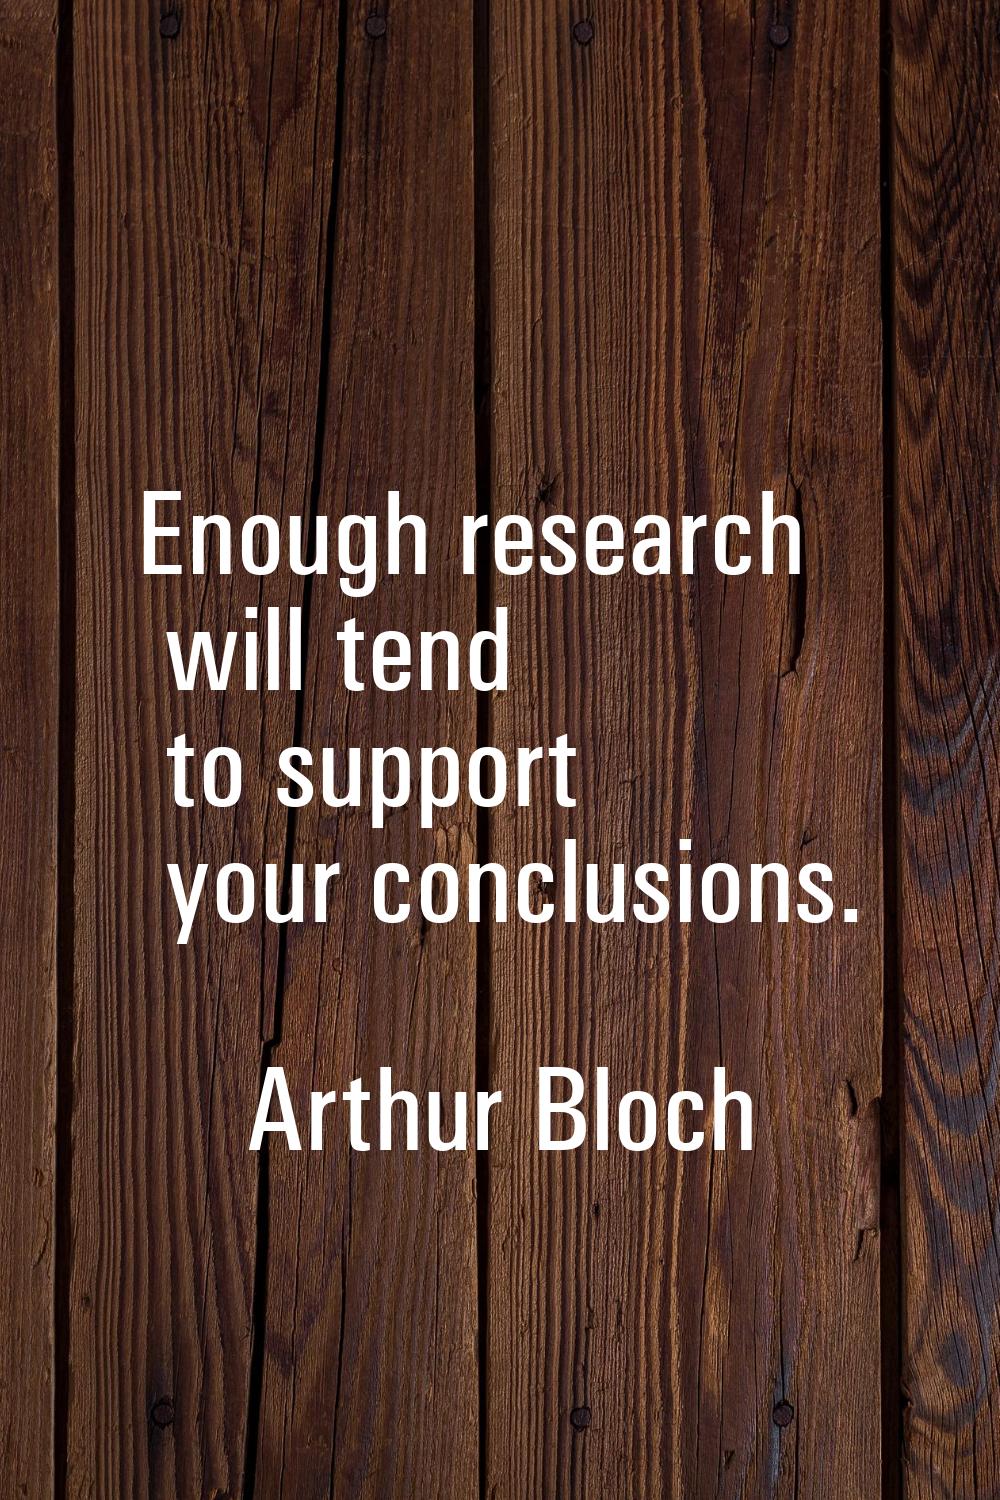 Enough research will tend to support your conclusions.